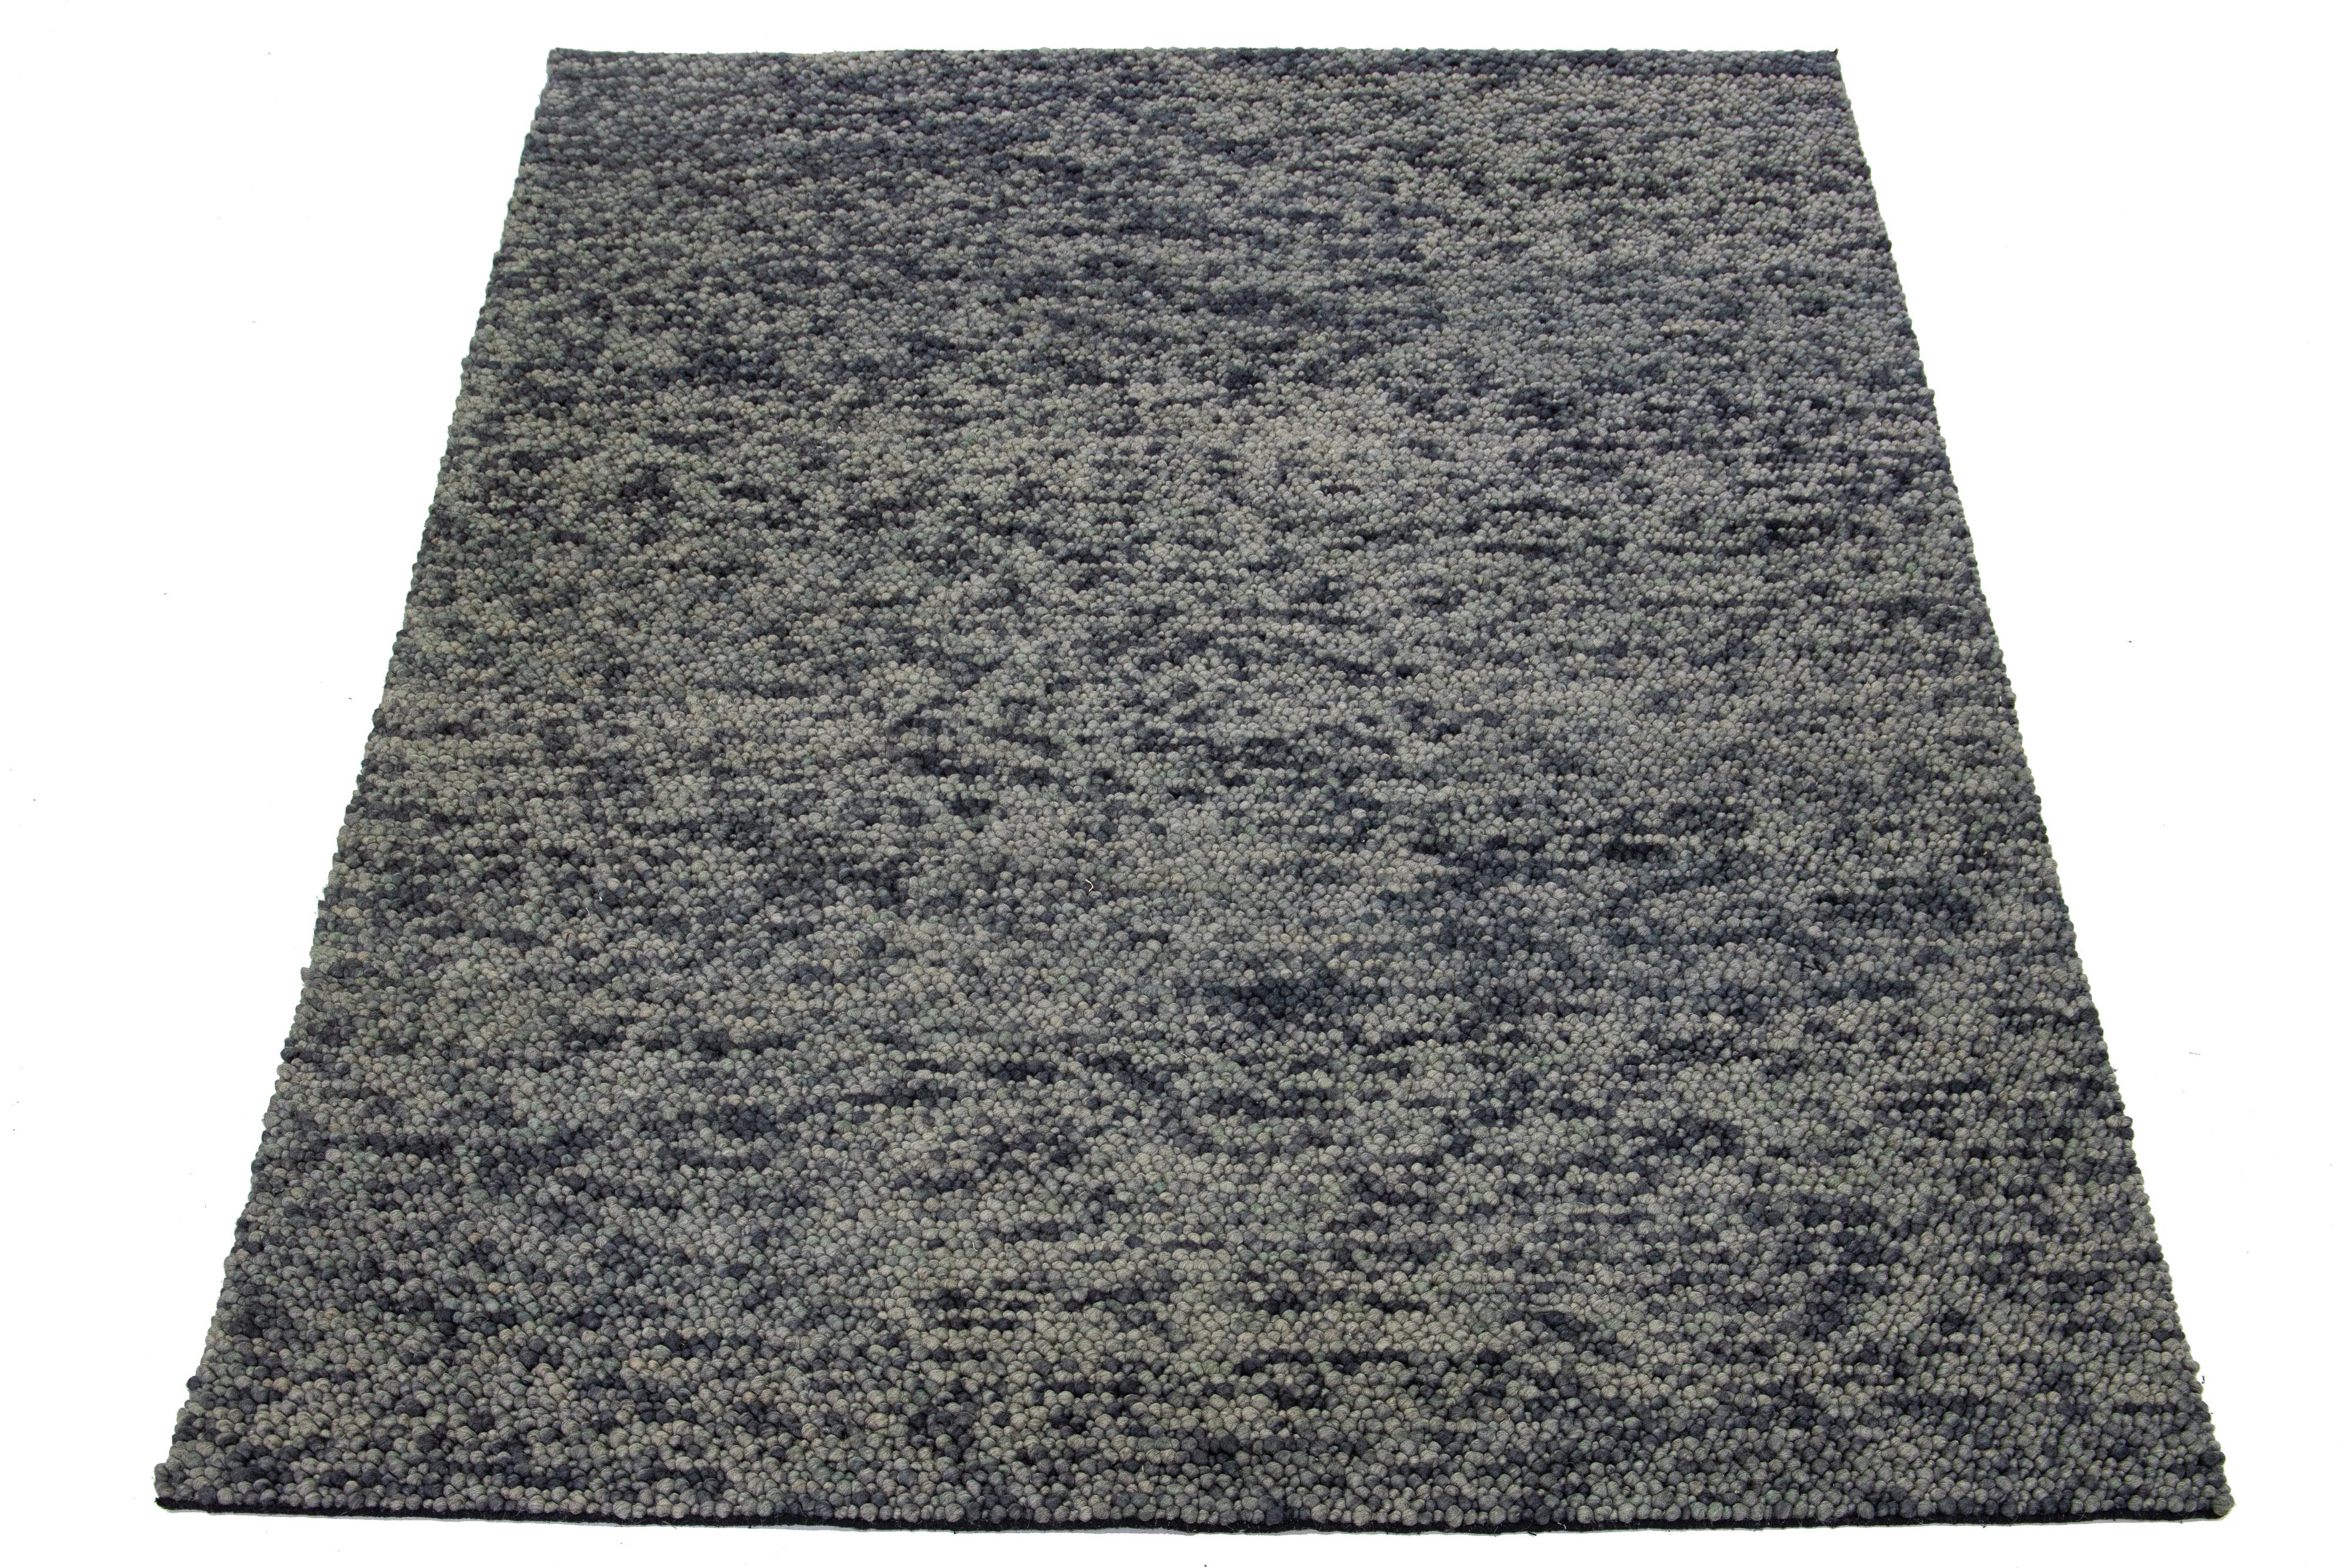 This beautiful, modern texture hand-knotted wool rug part of our Sasco collection features a color field of gray and blue. The rug also boasts a stunning textured abstract design resembling pebbles.

This rug measures 8' x 11'.

Our rugs are